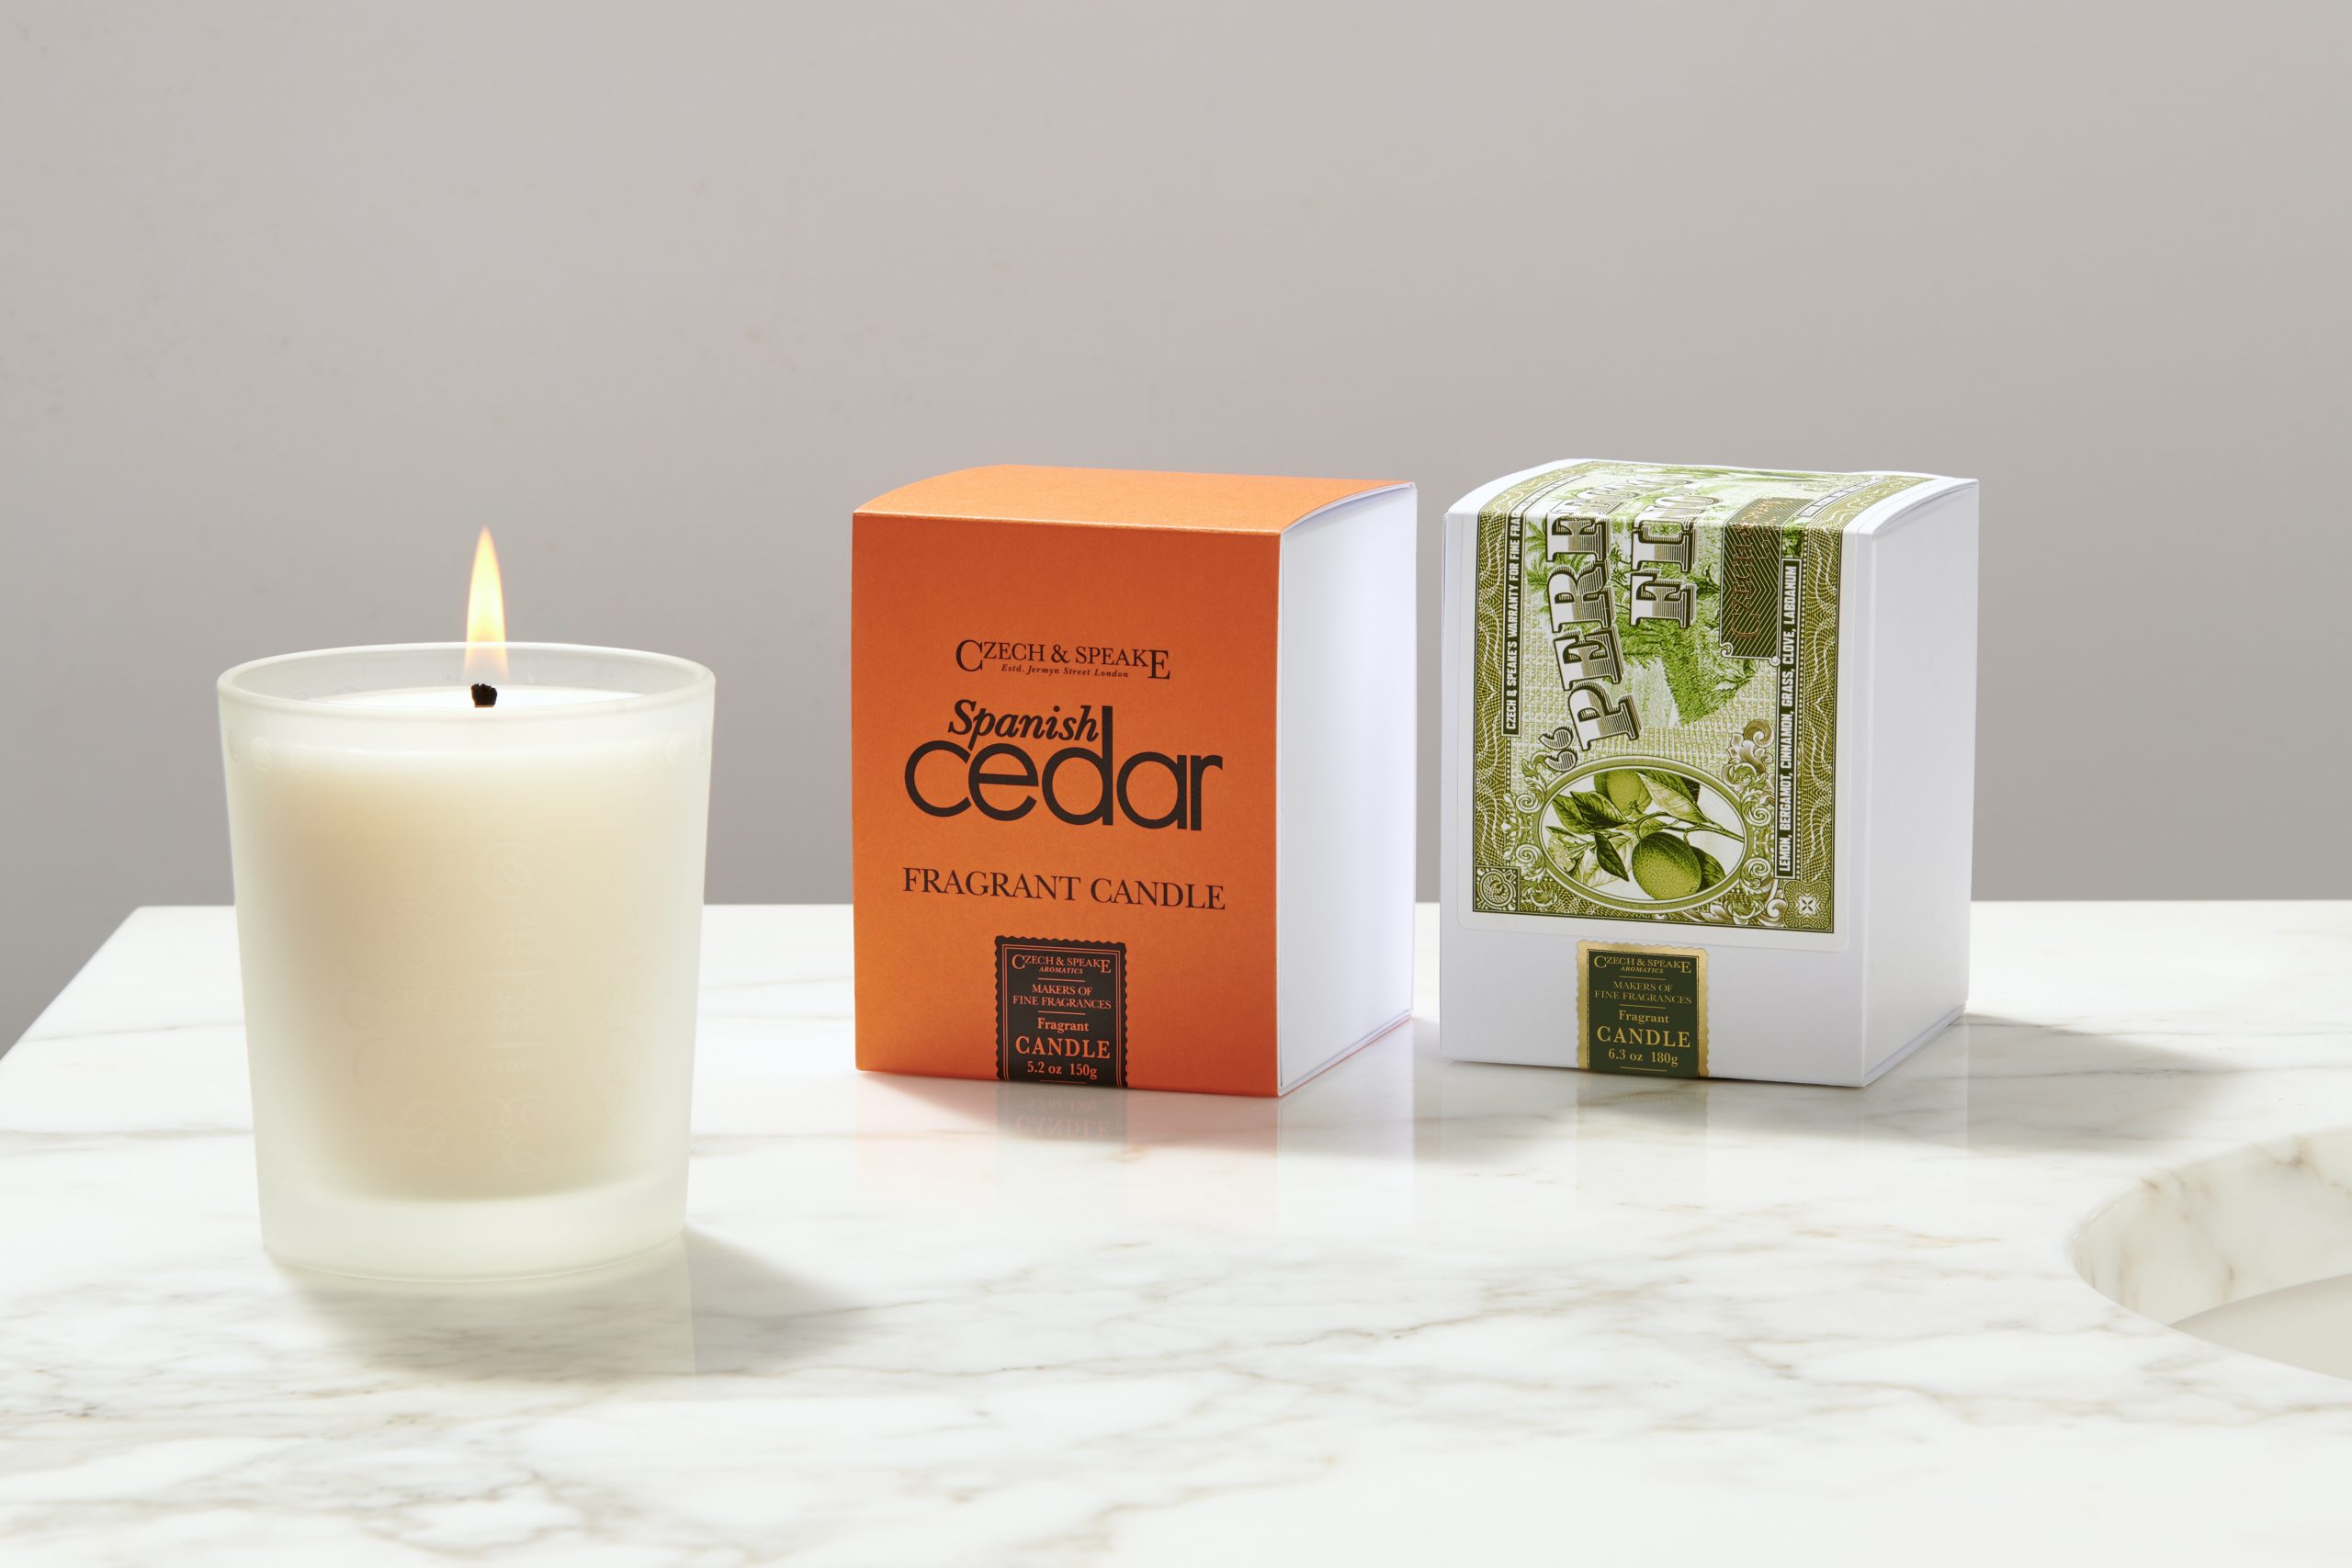 Czech & Speake candle in frosted glass with Spanish Cedar and Perfecto Fino packaging on marble surface.